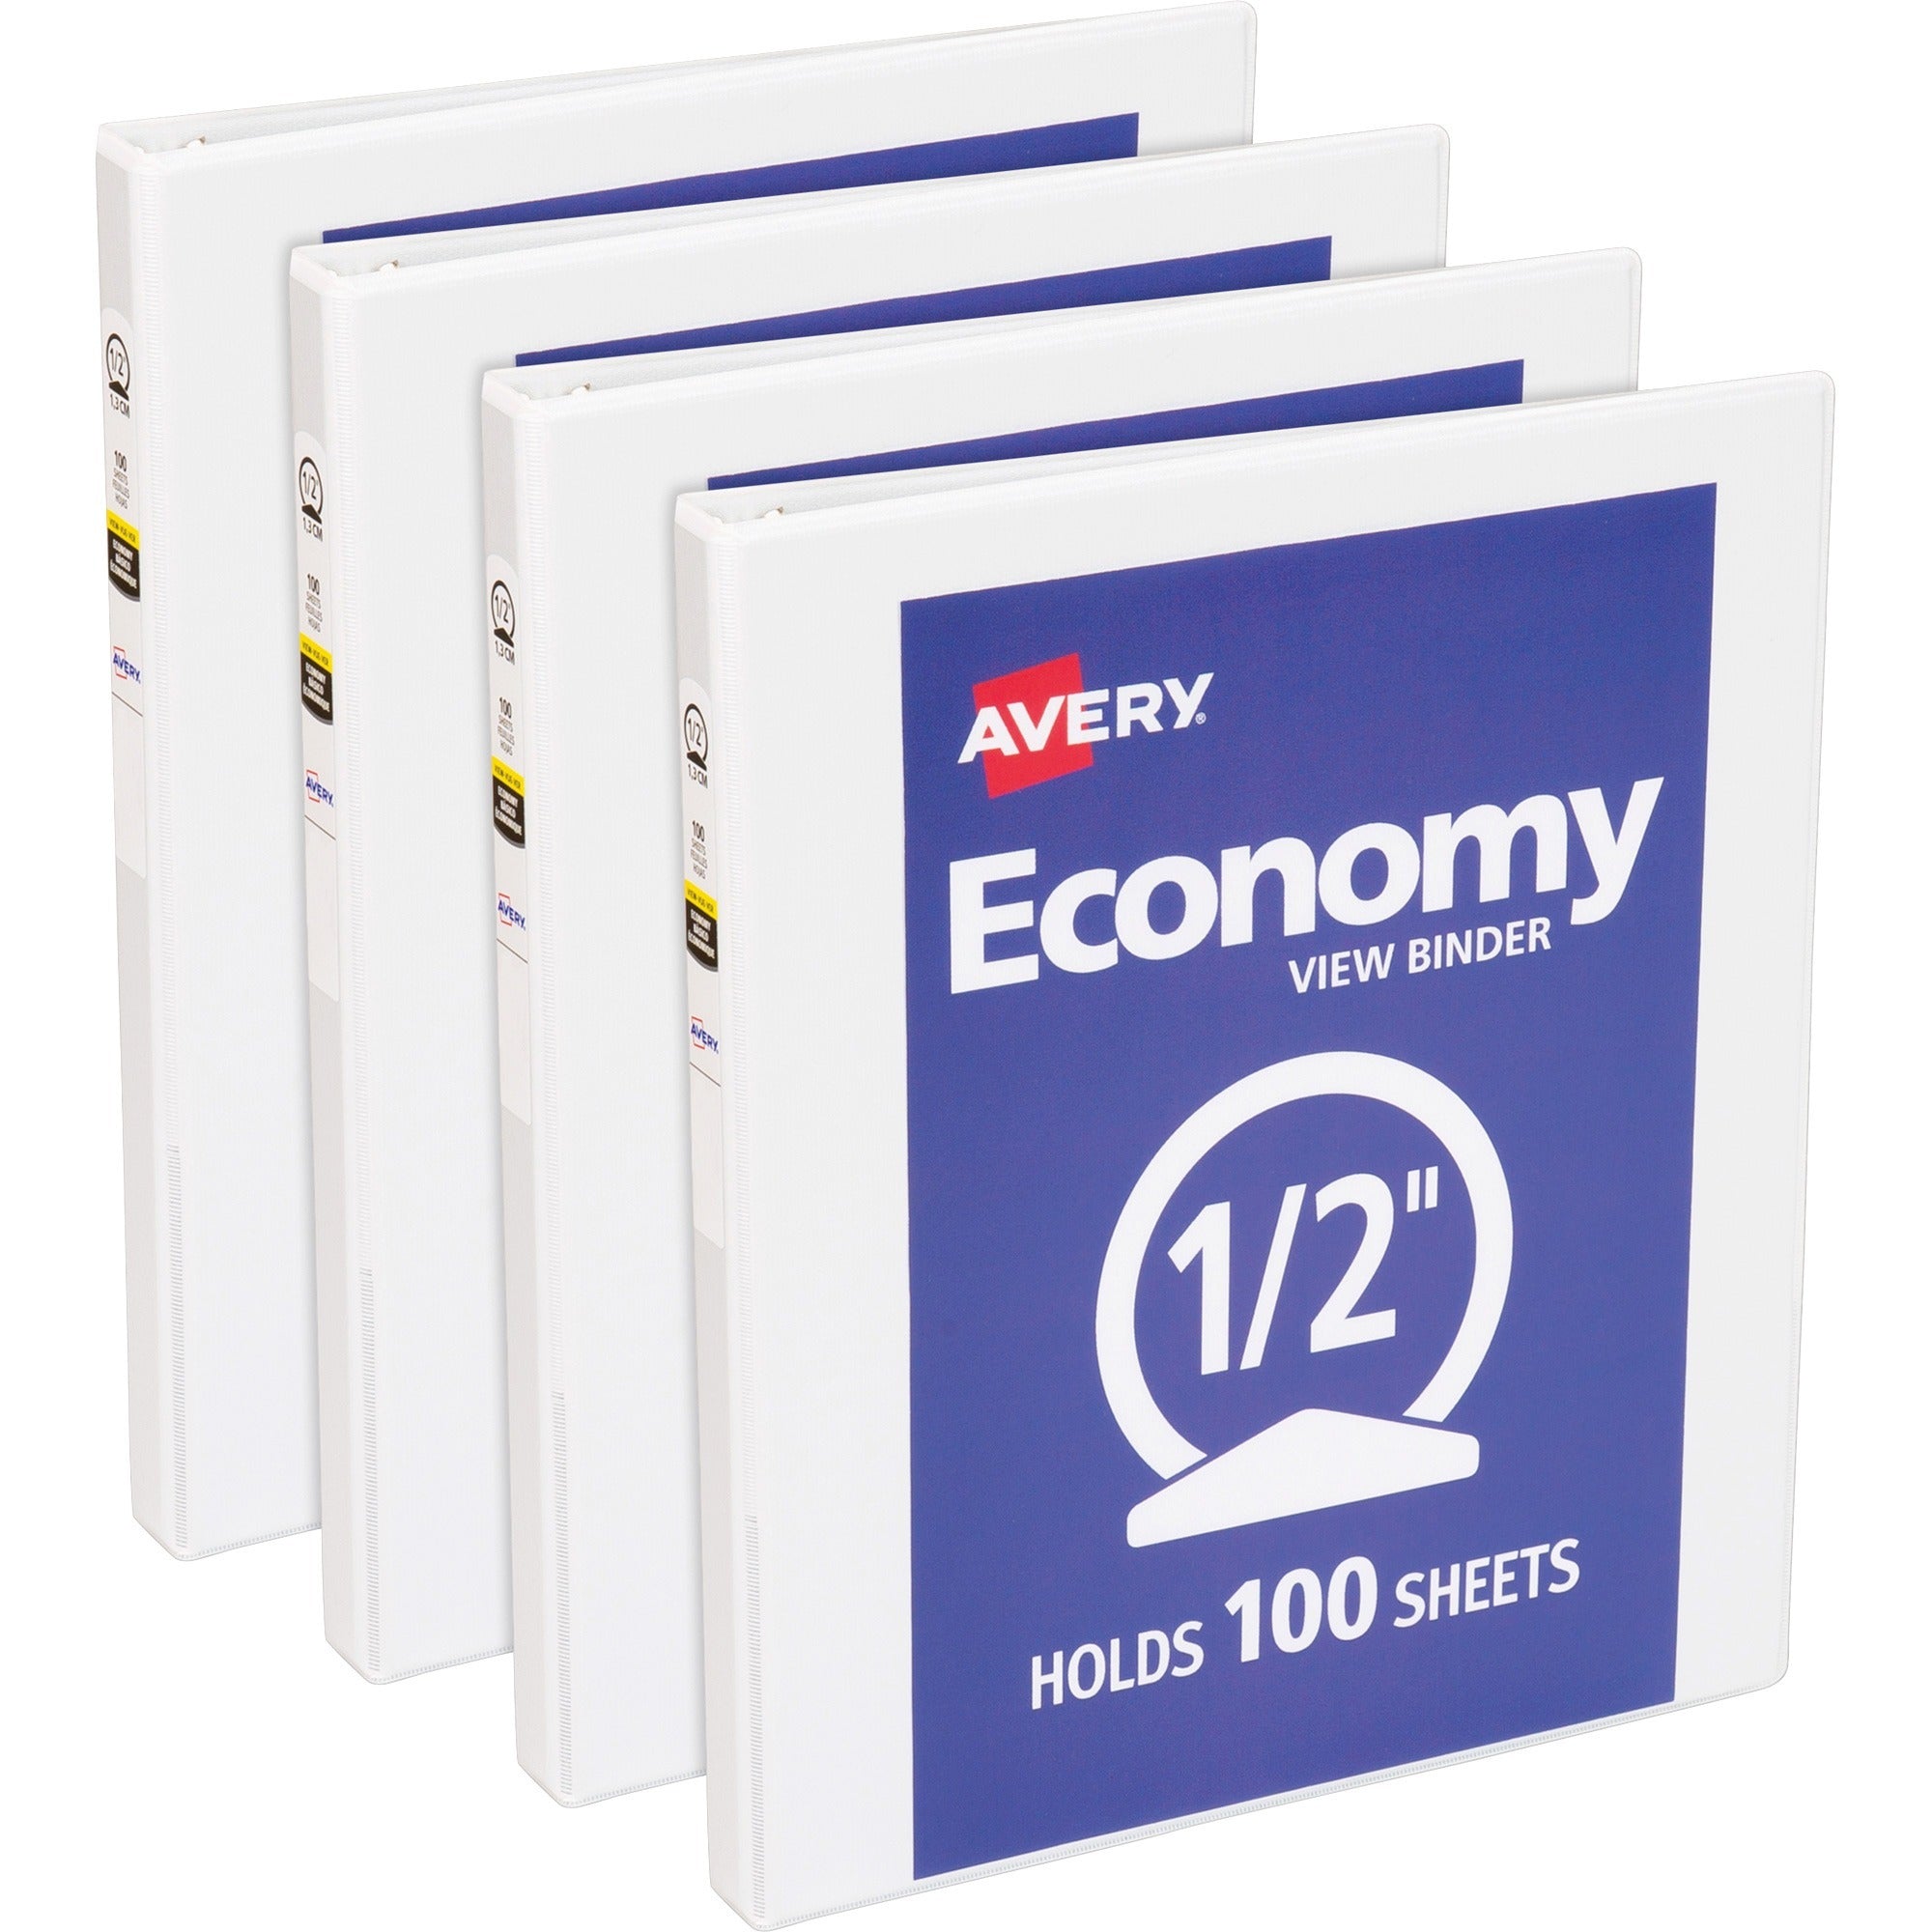 avery-economy-view-binder_ave05706bd - 1